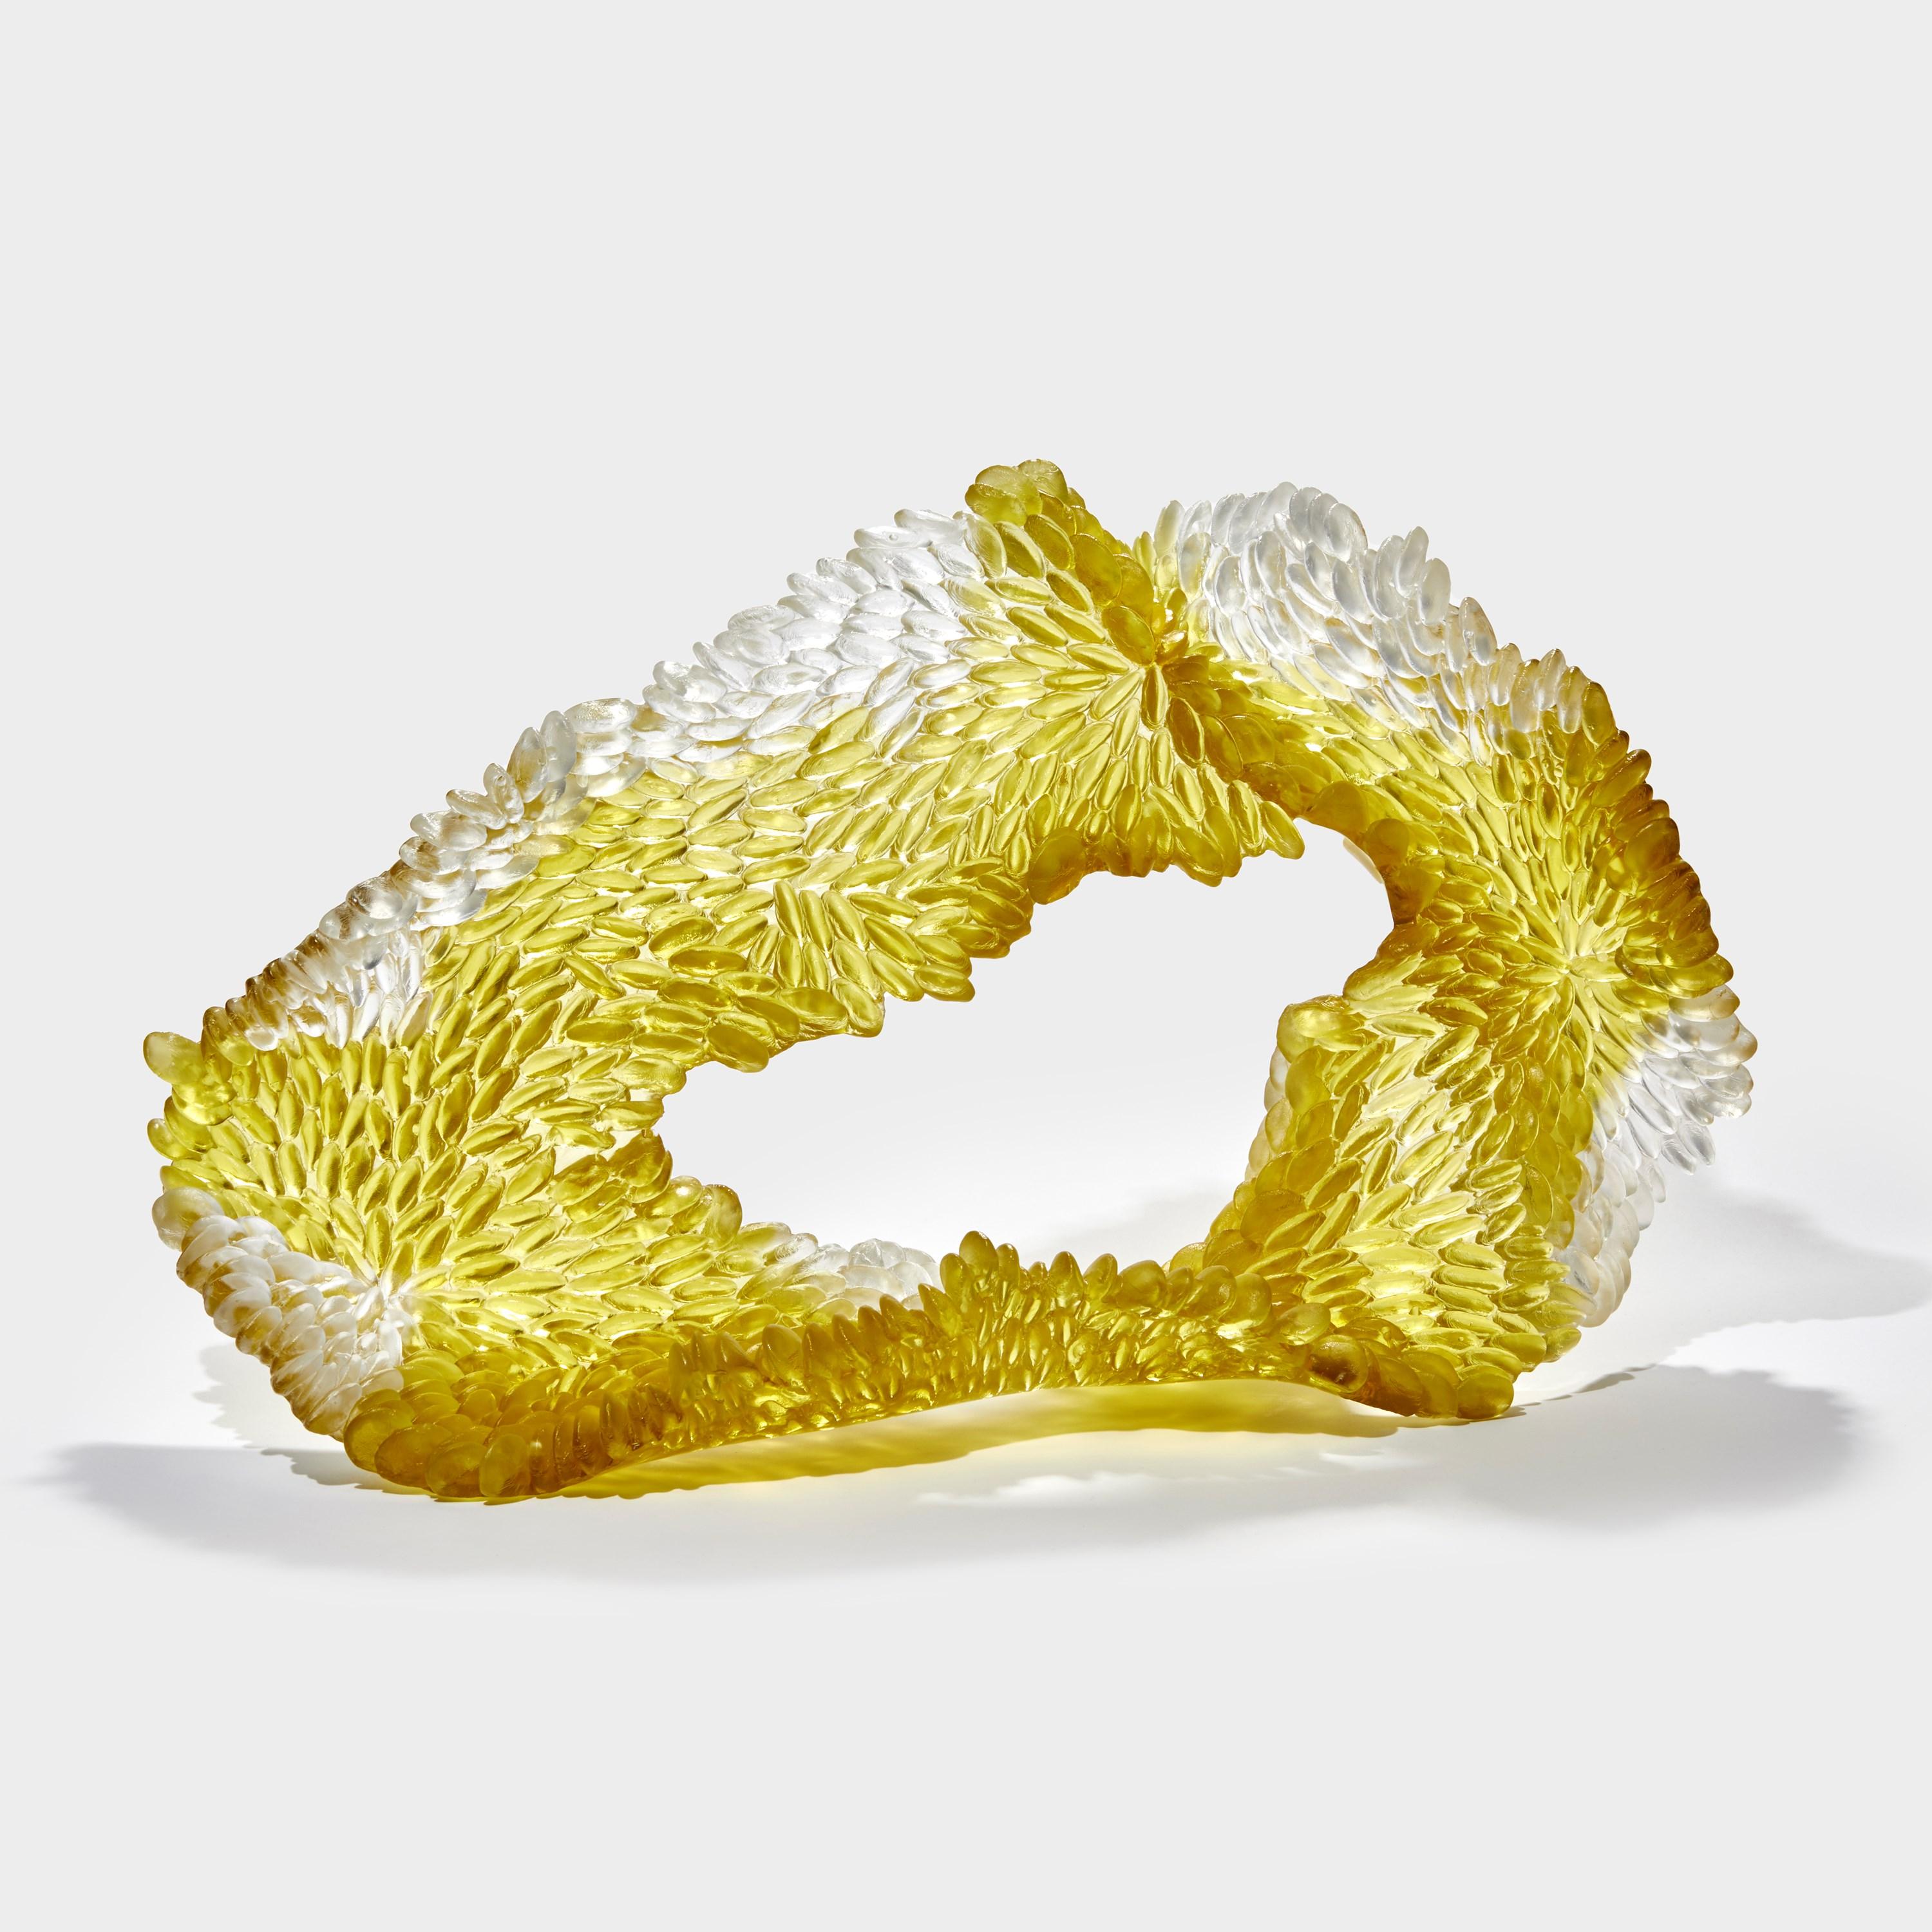 'Spring Yellows I' is a unique glass sculpture by the British artist, Nina Casson McGarva.

Casson McGarva firstly casts her glass in a flat mould where she introduces all of the beautifully detailed, scaled surface texture, all unique and to her